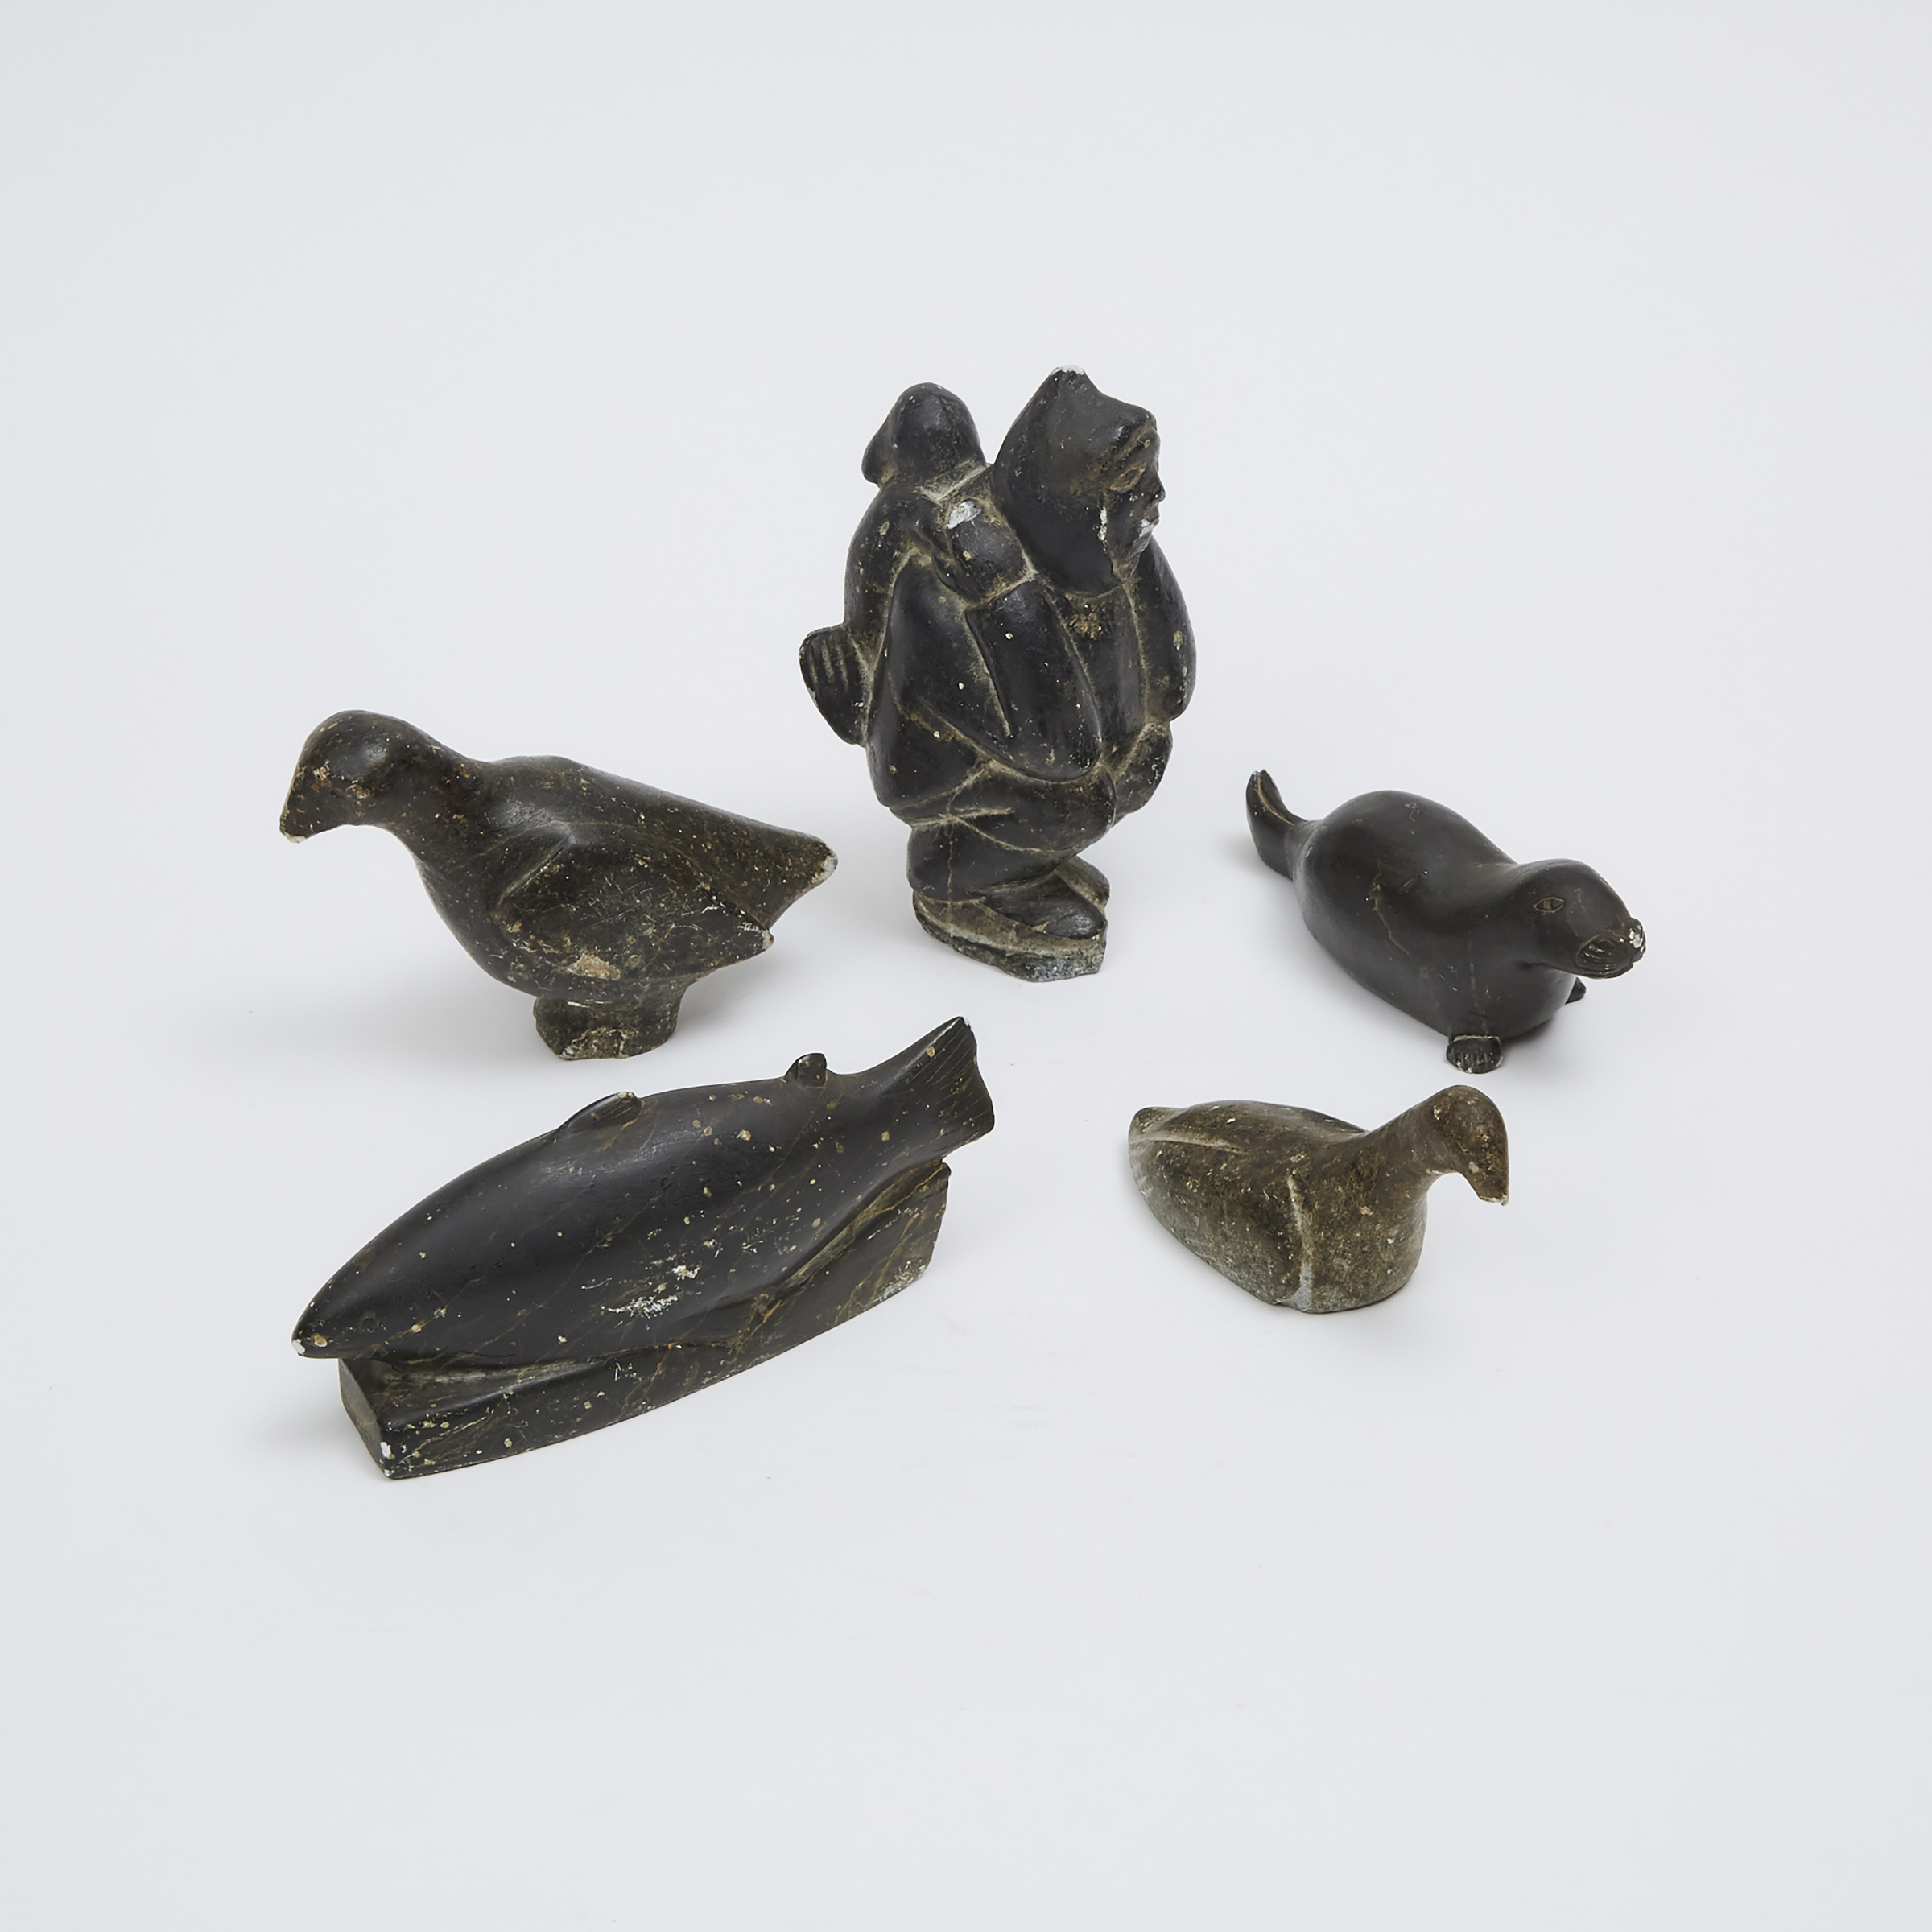 COLLECTION OF  SMALL INUIT STONE CARVINGS